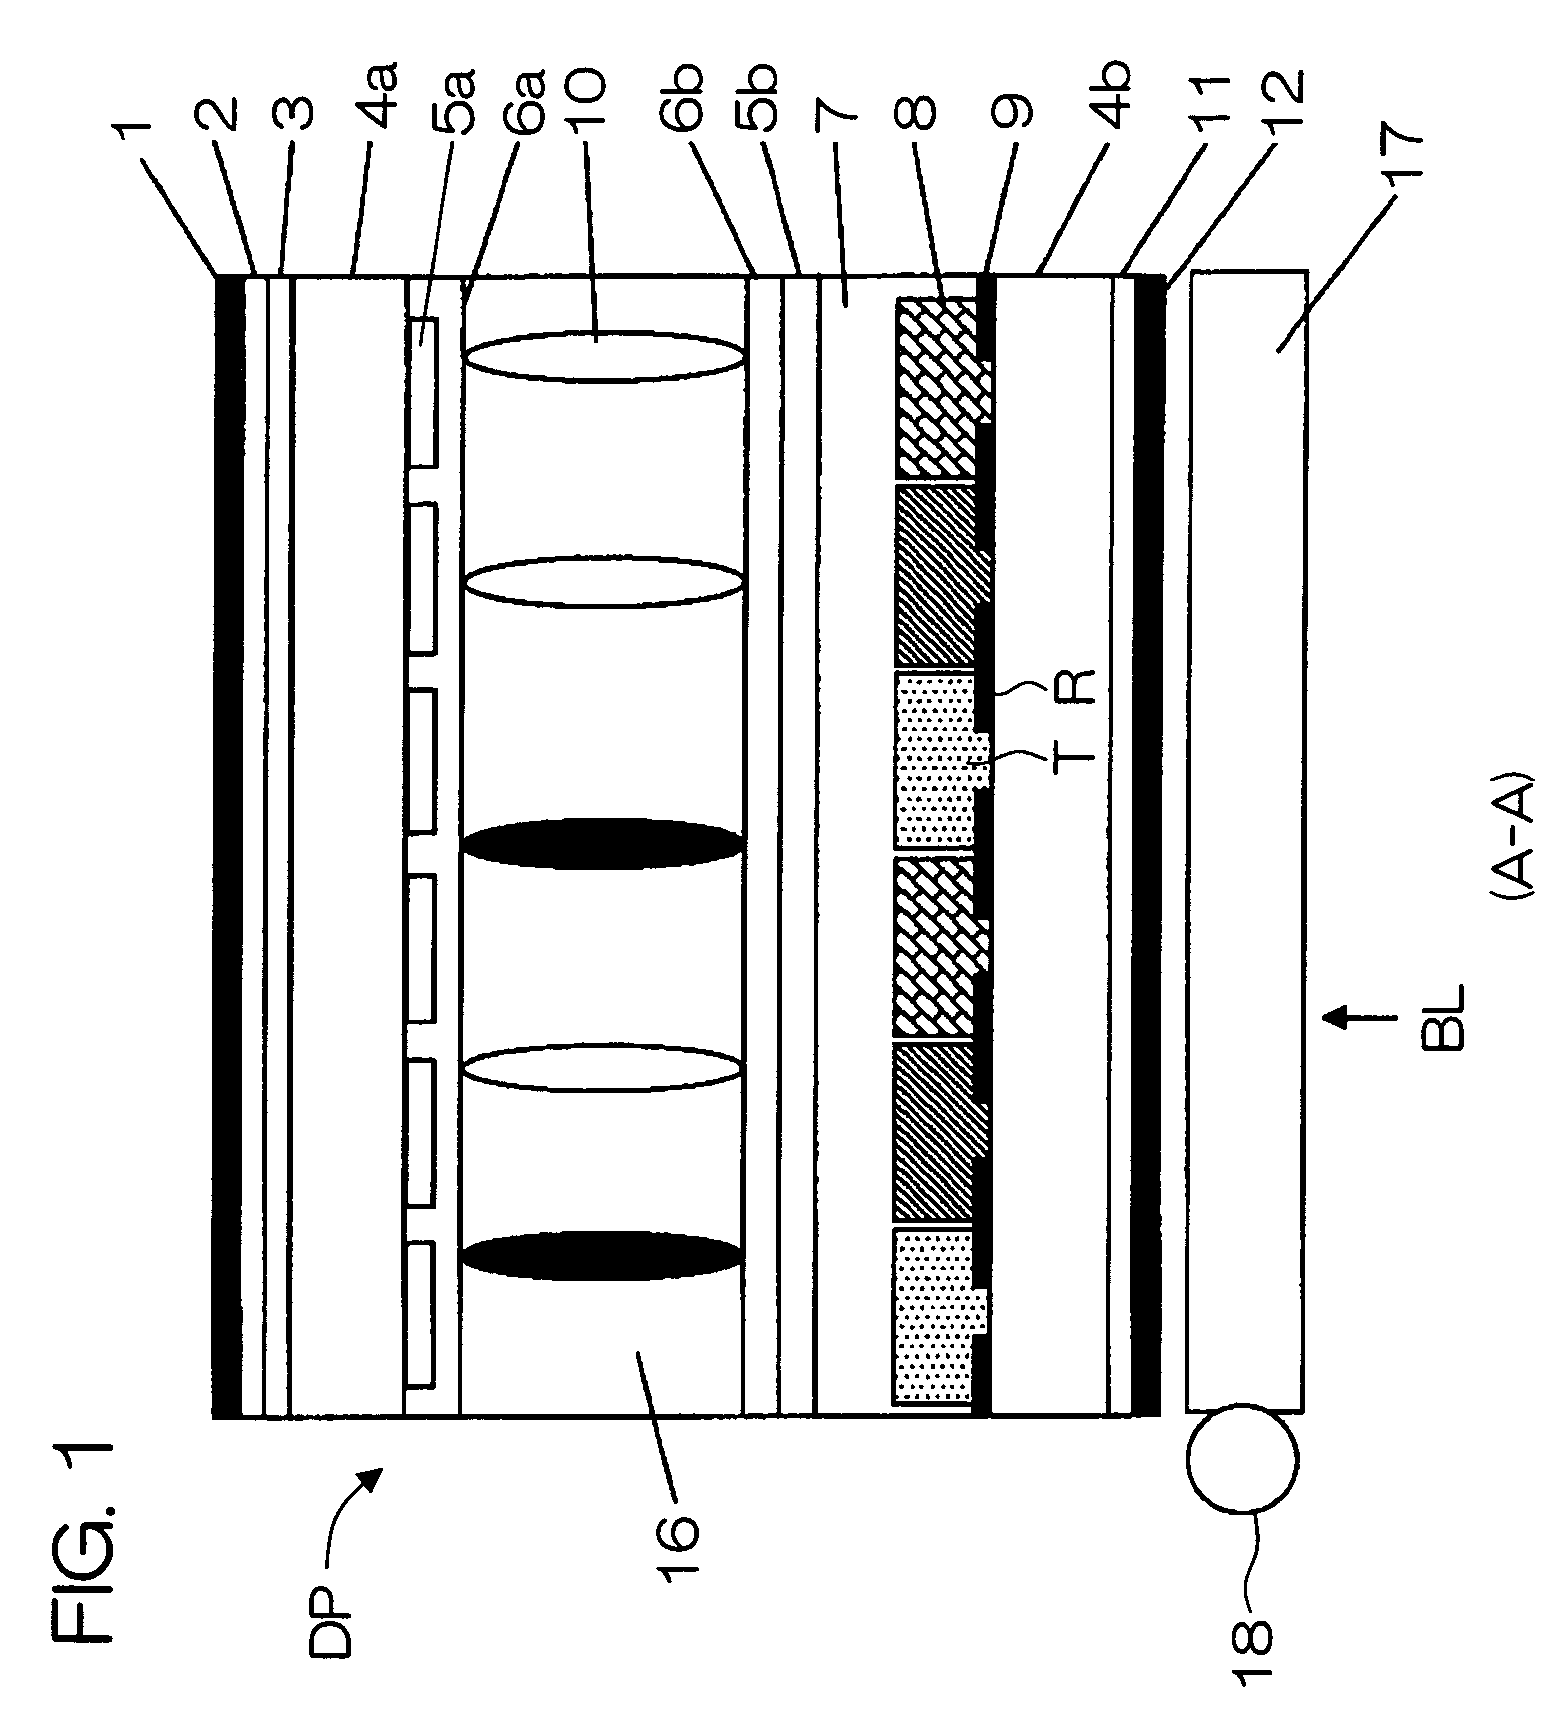 Liquid crystal display device having black and transparent spacers in the transmissive region